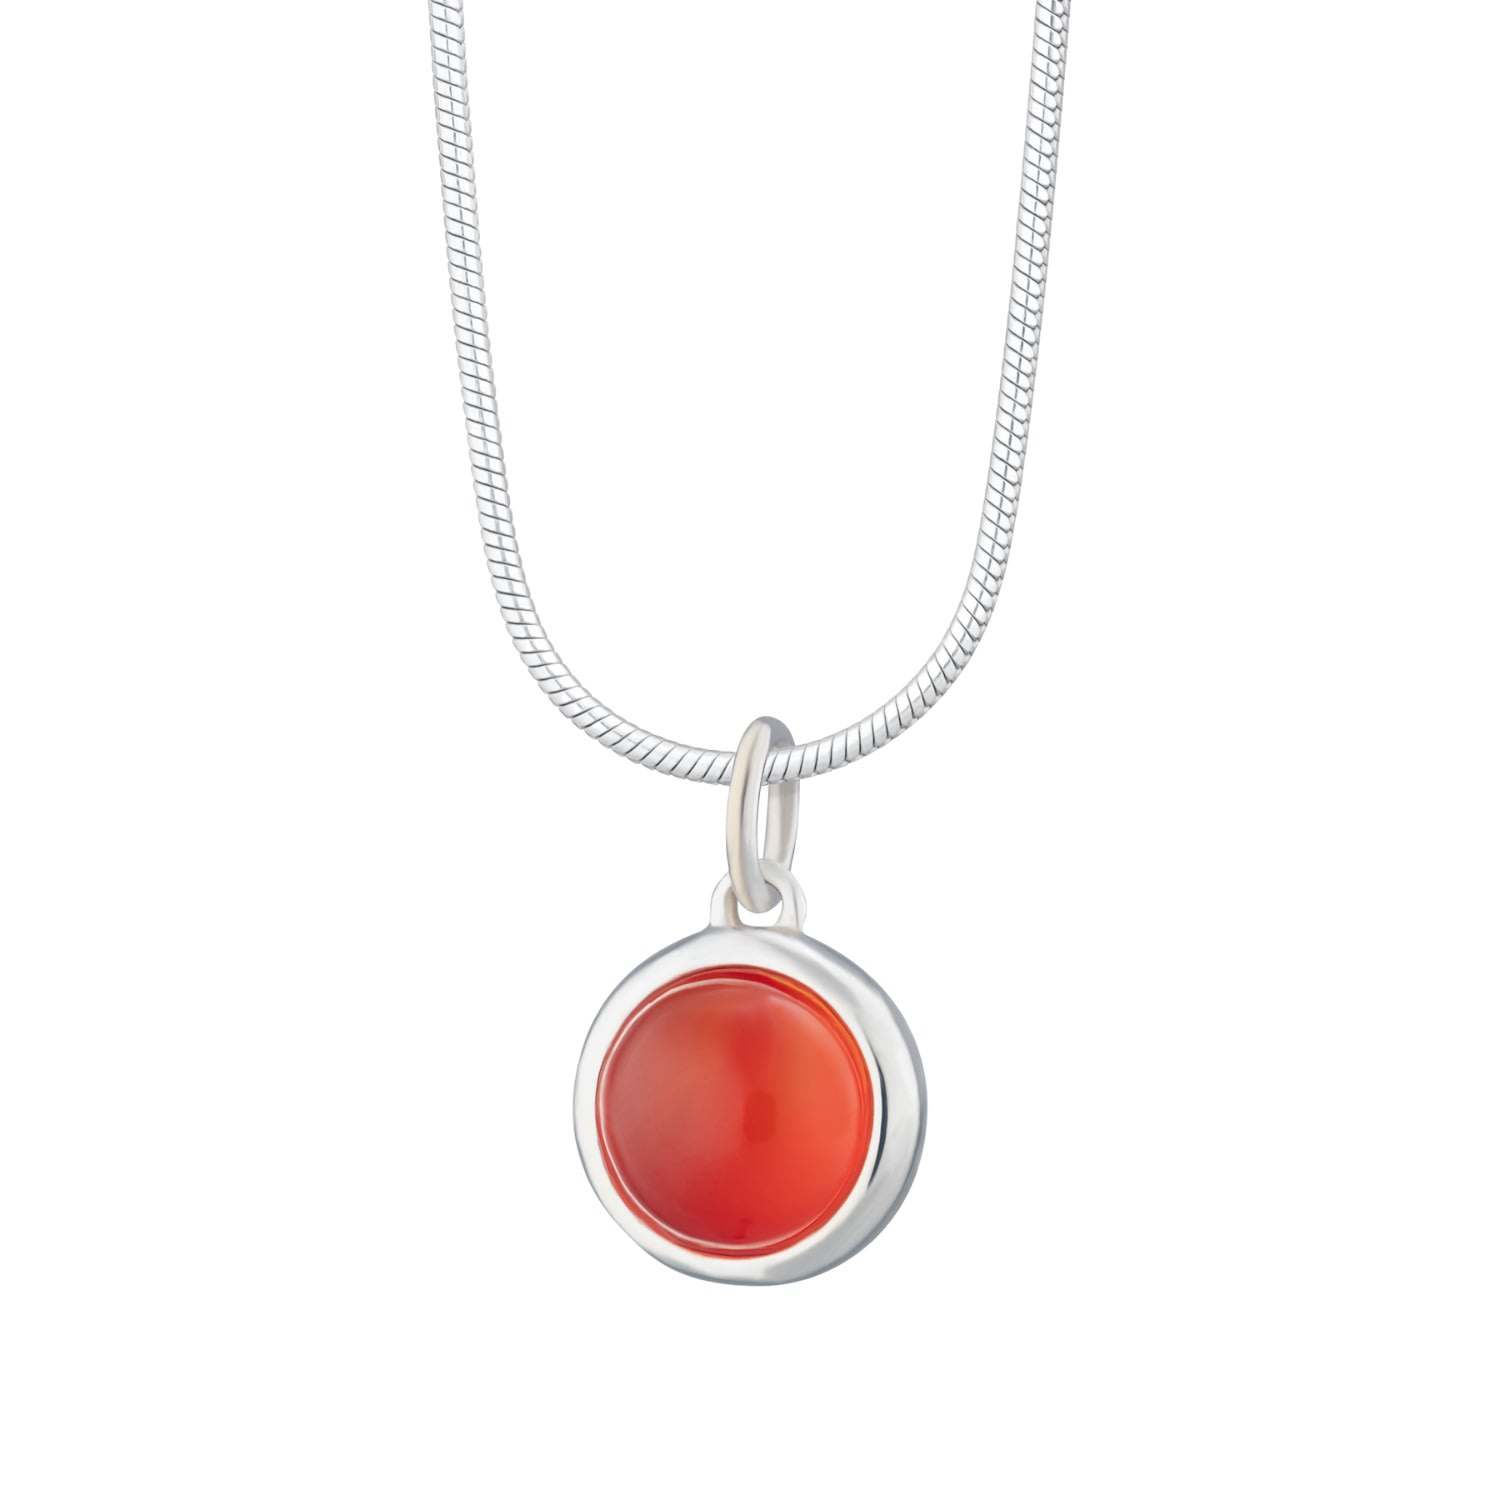 Women’s Sterling Silver Orange Agate Touchstone Necklace With Slim Snake Chain - Harmony Lily Charmed